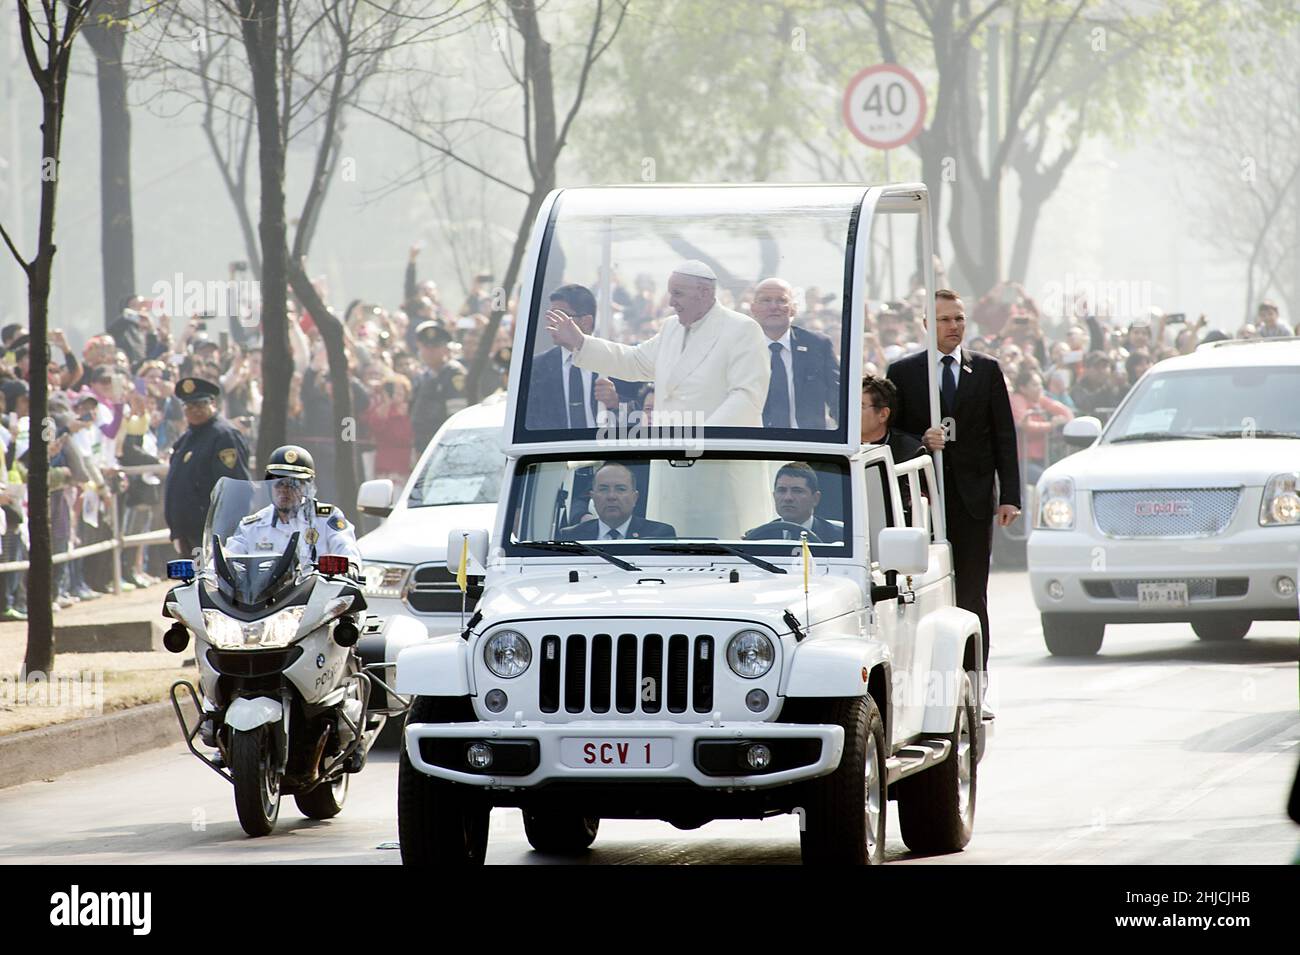 February 14, 2016; Mexico City, Mexico. Pope Francis riding in a Chrysler Jeep Wrangler popemobile speeds past crowds of waving Mexicans along a major avenue in Mexico City during his second full day of activities in the Mexican capital. Pope Francis spent 5 days in Mexico visiting cities all across Mexico recently torn by a brutal drug war, corruption, and economic problems. Stock Photo